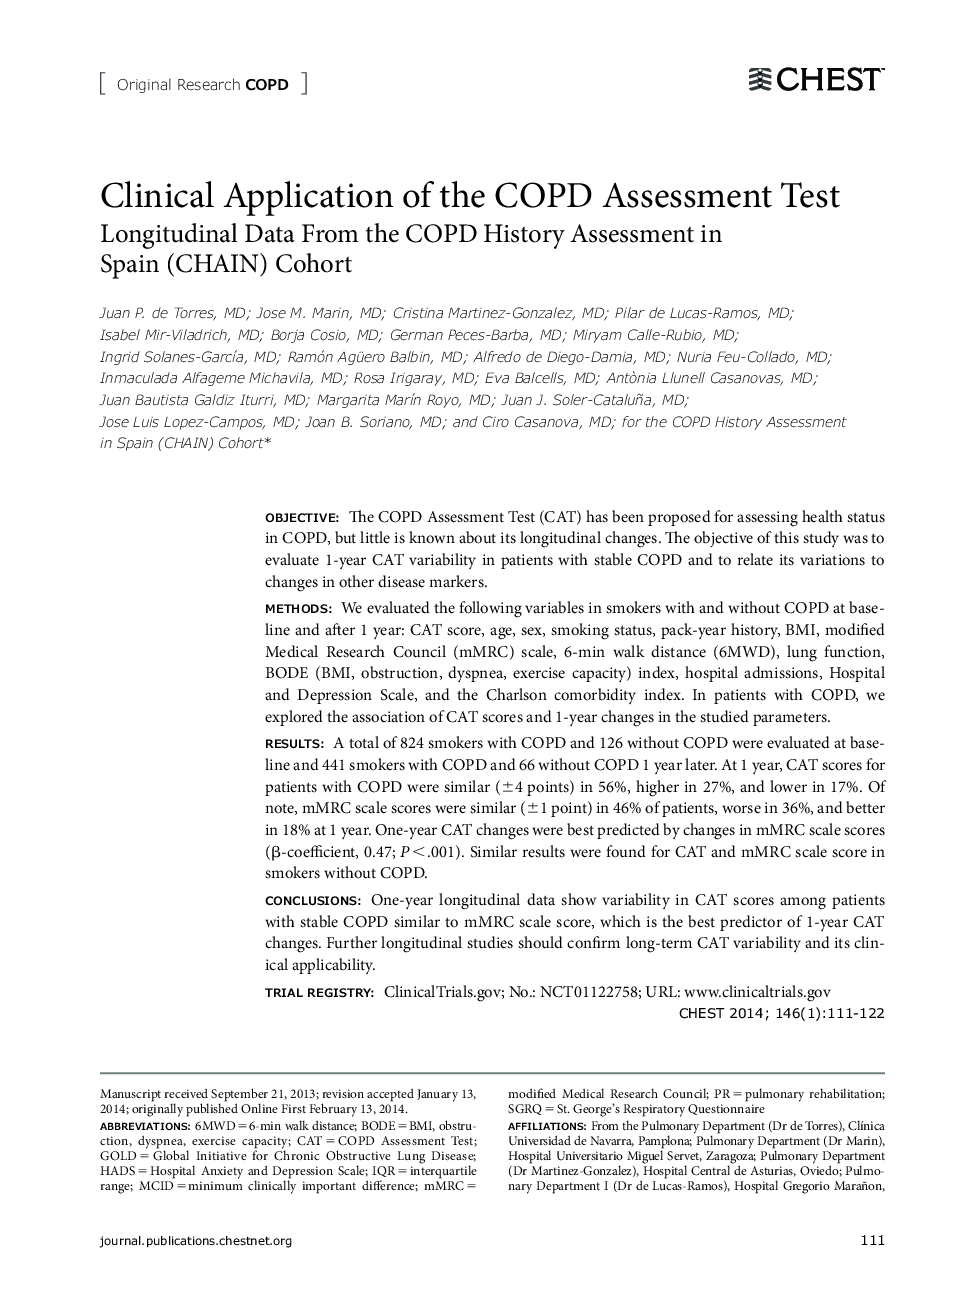 Clinical Application of the COPD Assessment Test